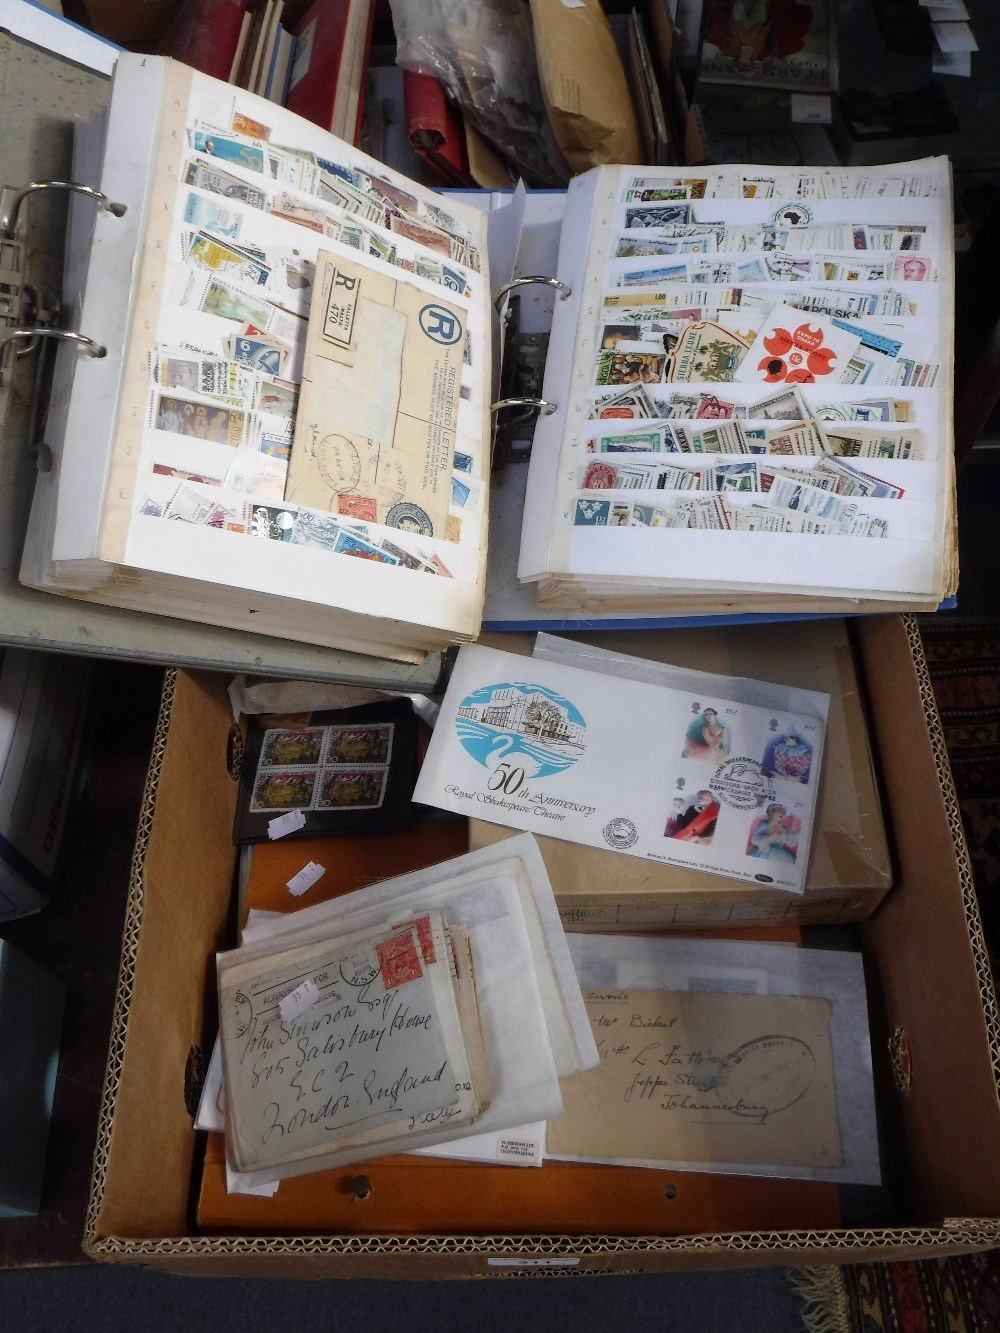 A LARGE COLLECTION OF ASSORTED WORLD STAMPS